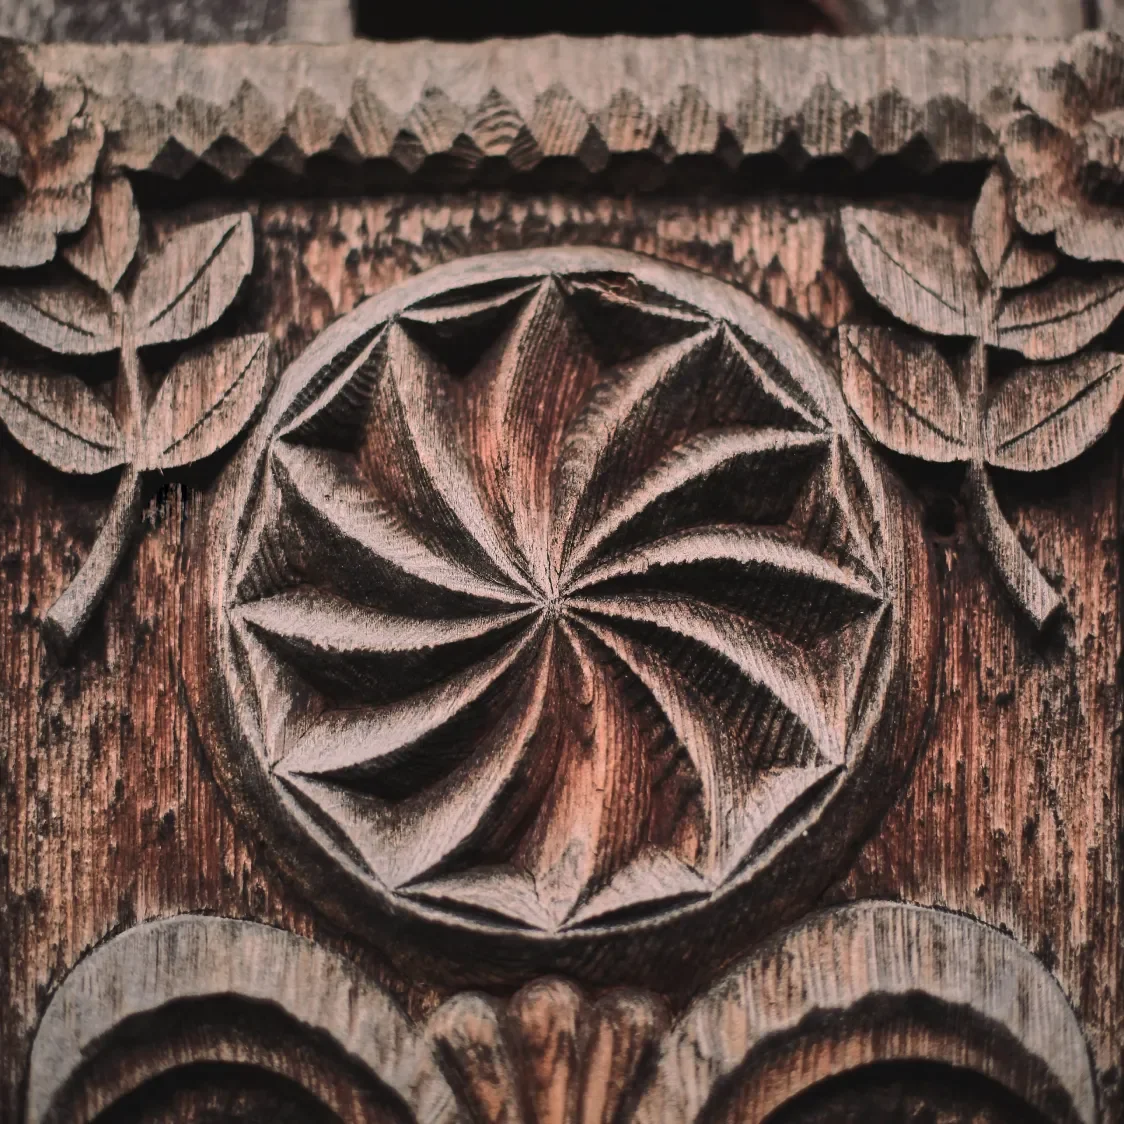 Wood carving that acted as the inspiration for the Wonani tiki symbol